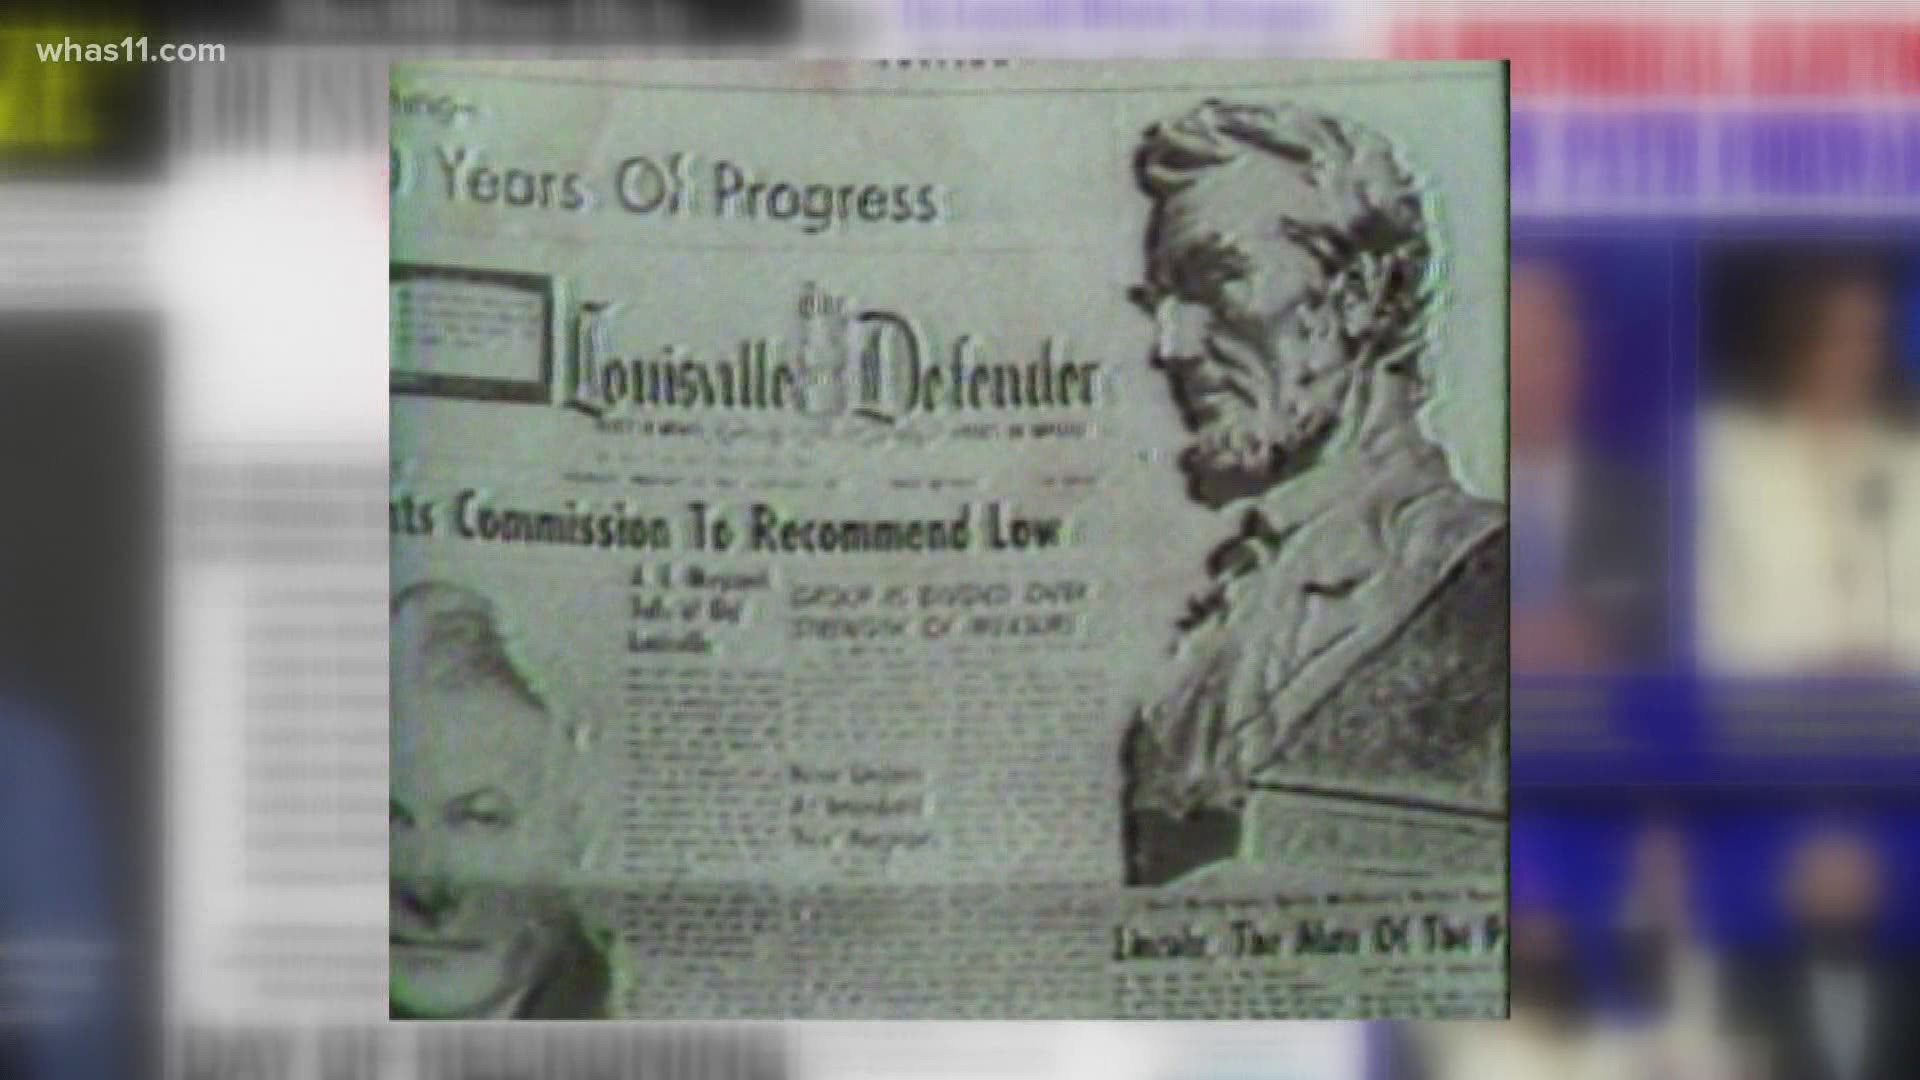 The 'Defender,' founded in 1933, was one of three newspapers focused on telling stories that affected African Americans in Louisville.